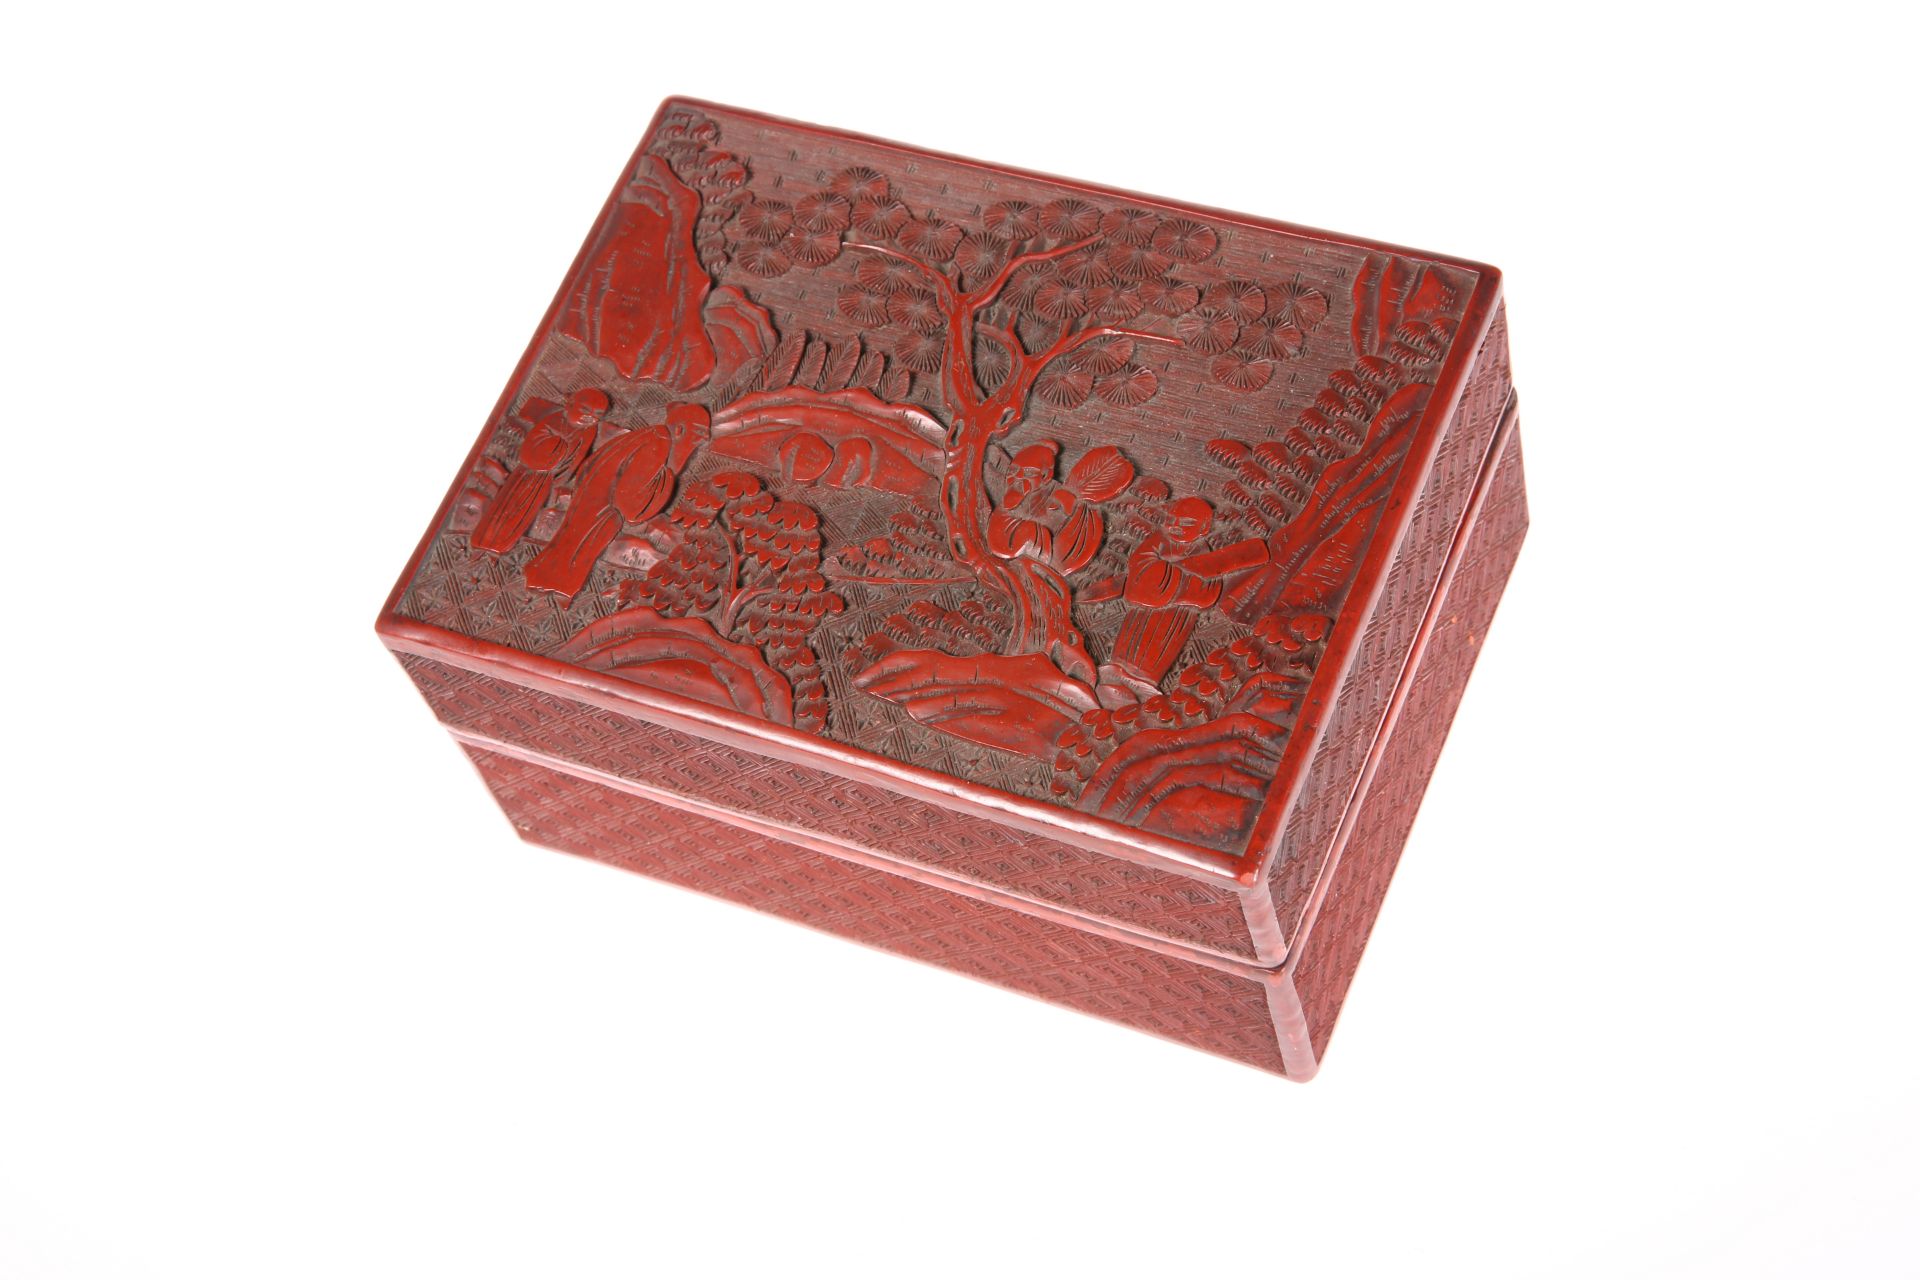 A CHINESE RED CINNABAR LACQUER BOX, 19TH CENTURY